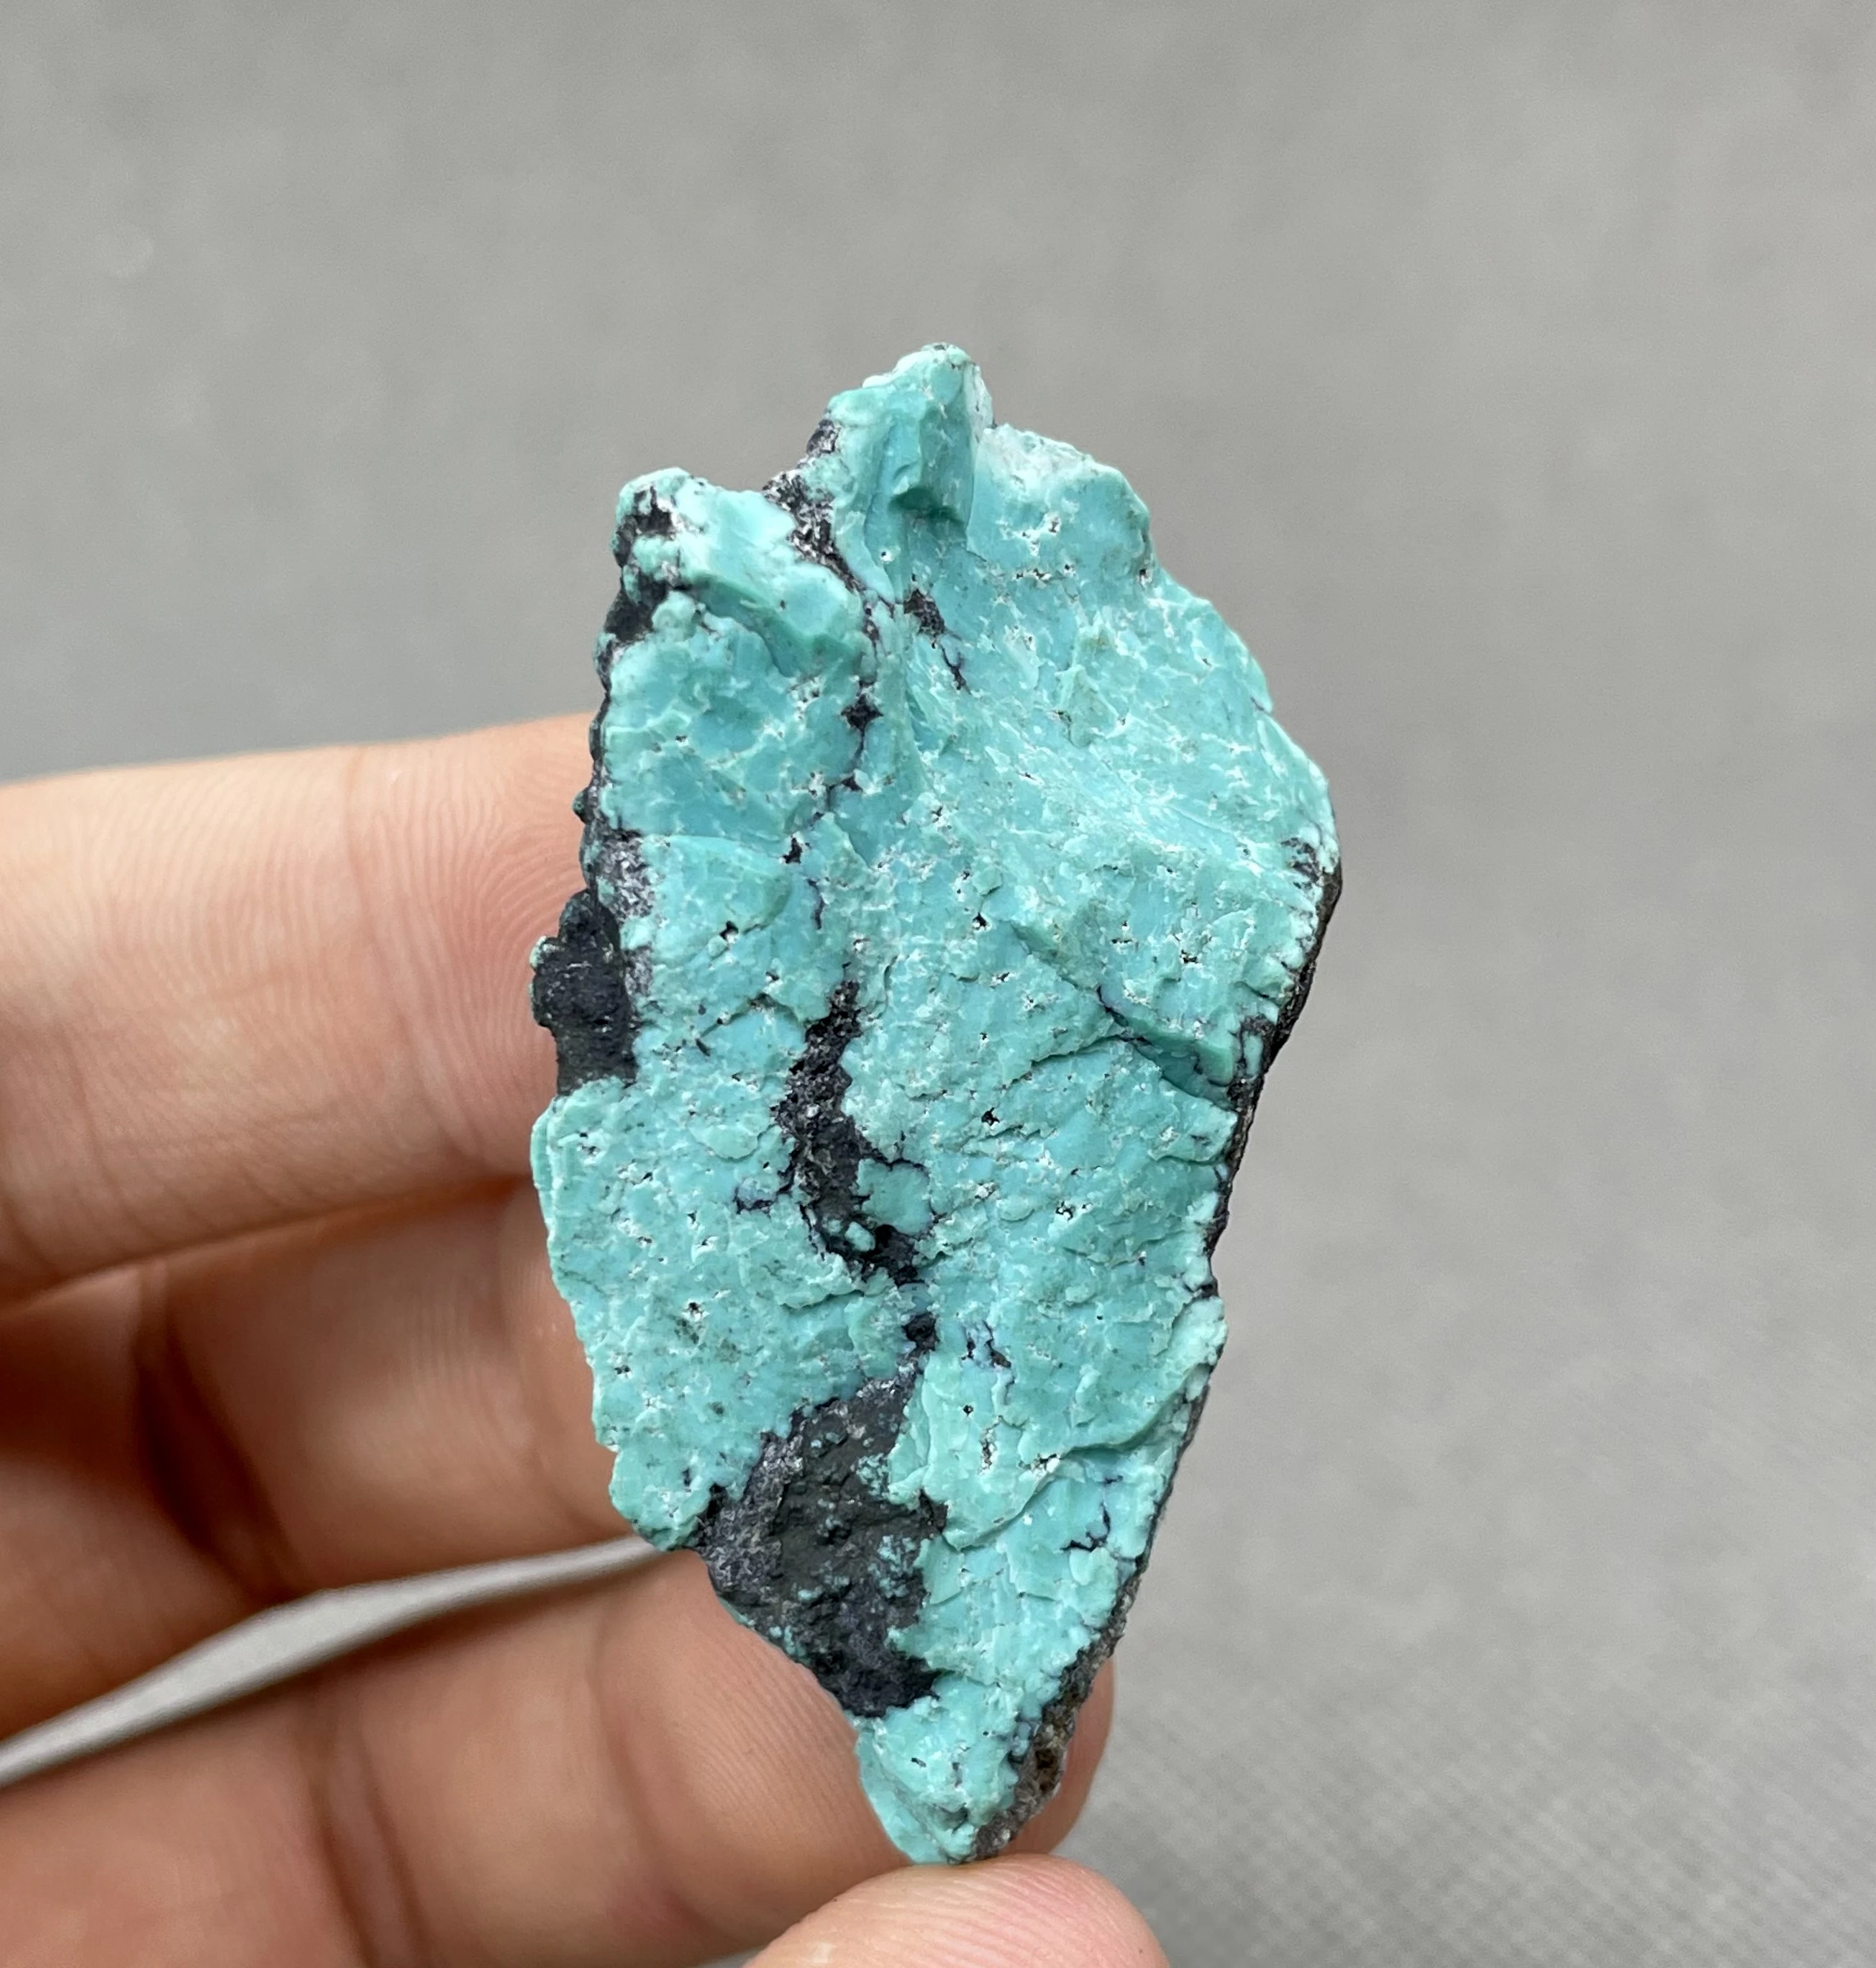 Details about   Man-Made Turquoise Slice Mineral Specimen NG16543-16552 Free Shipping 